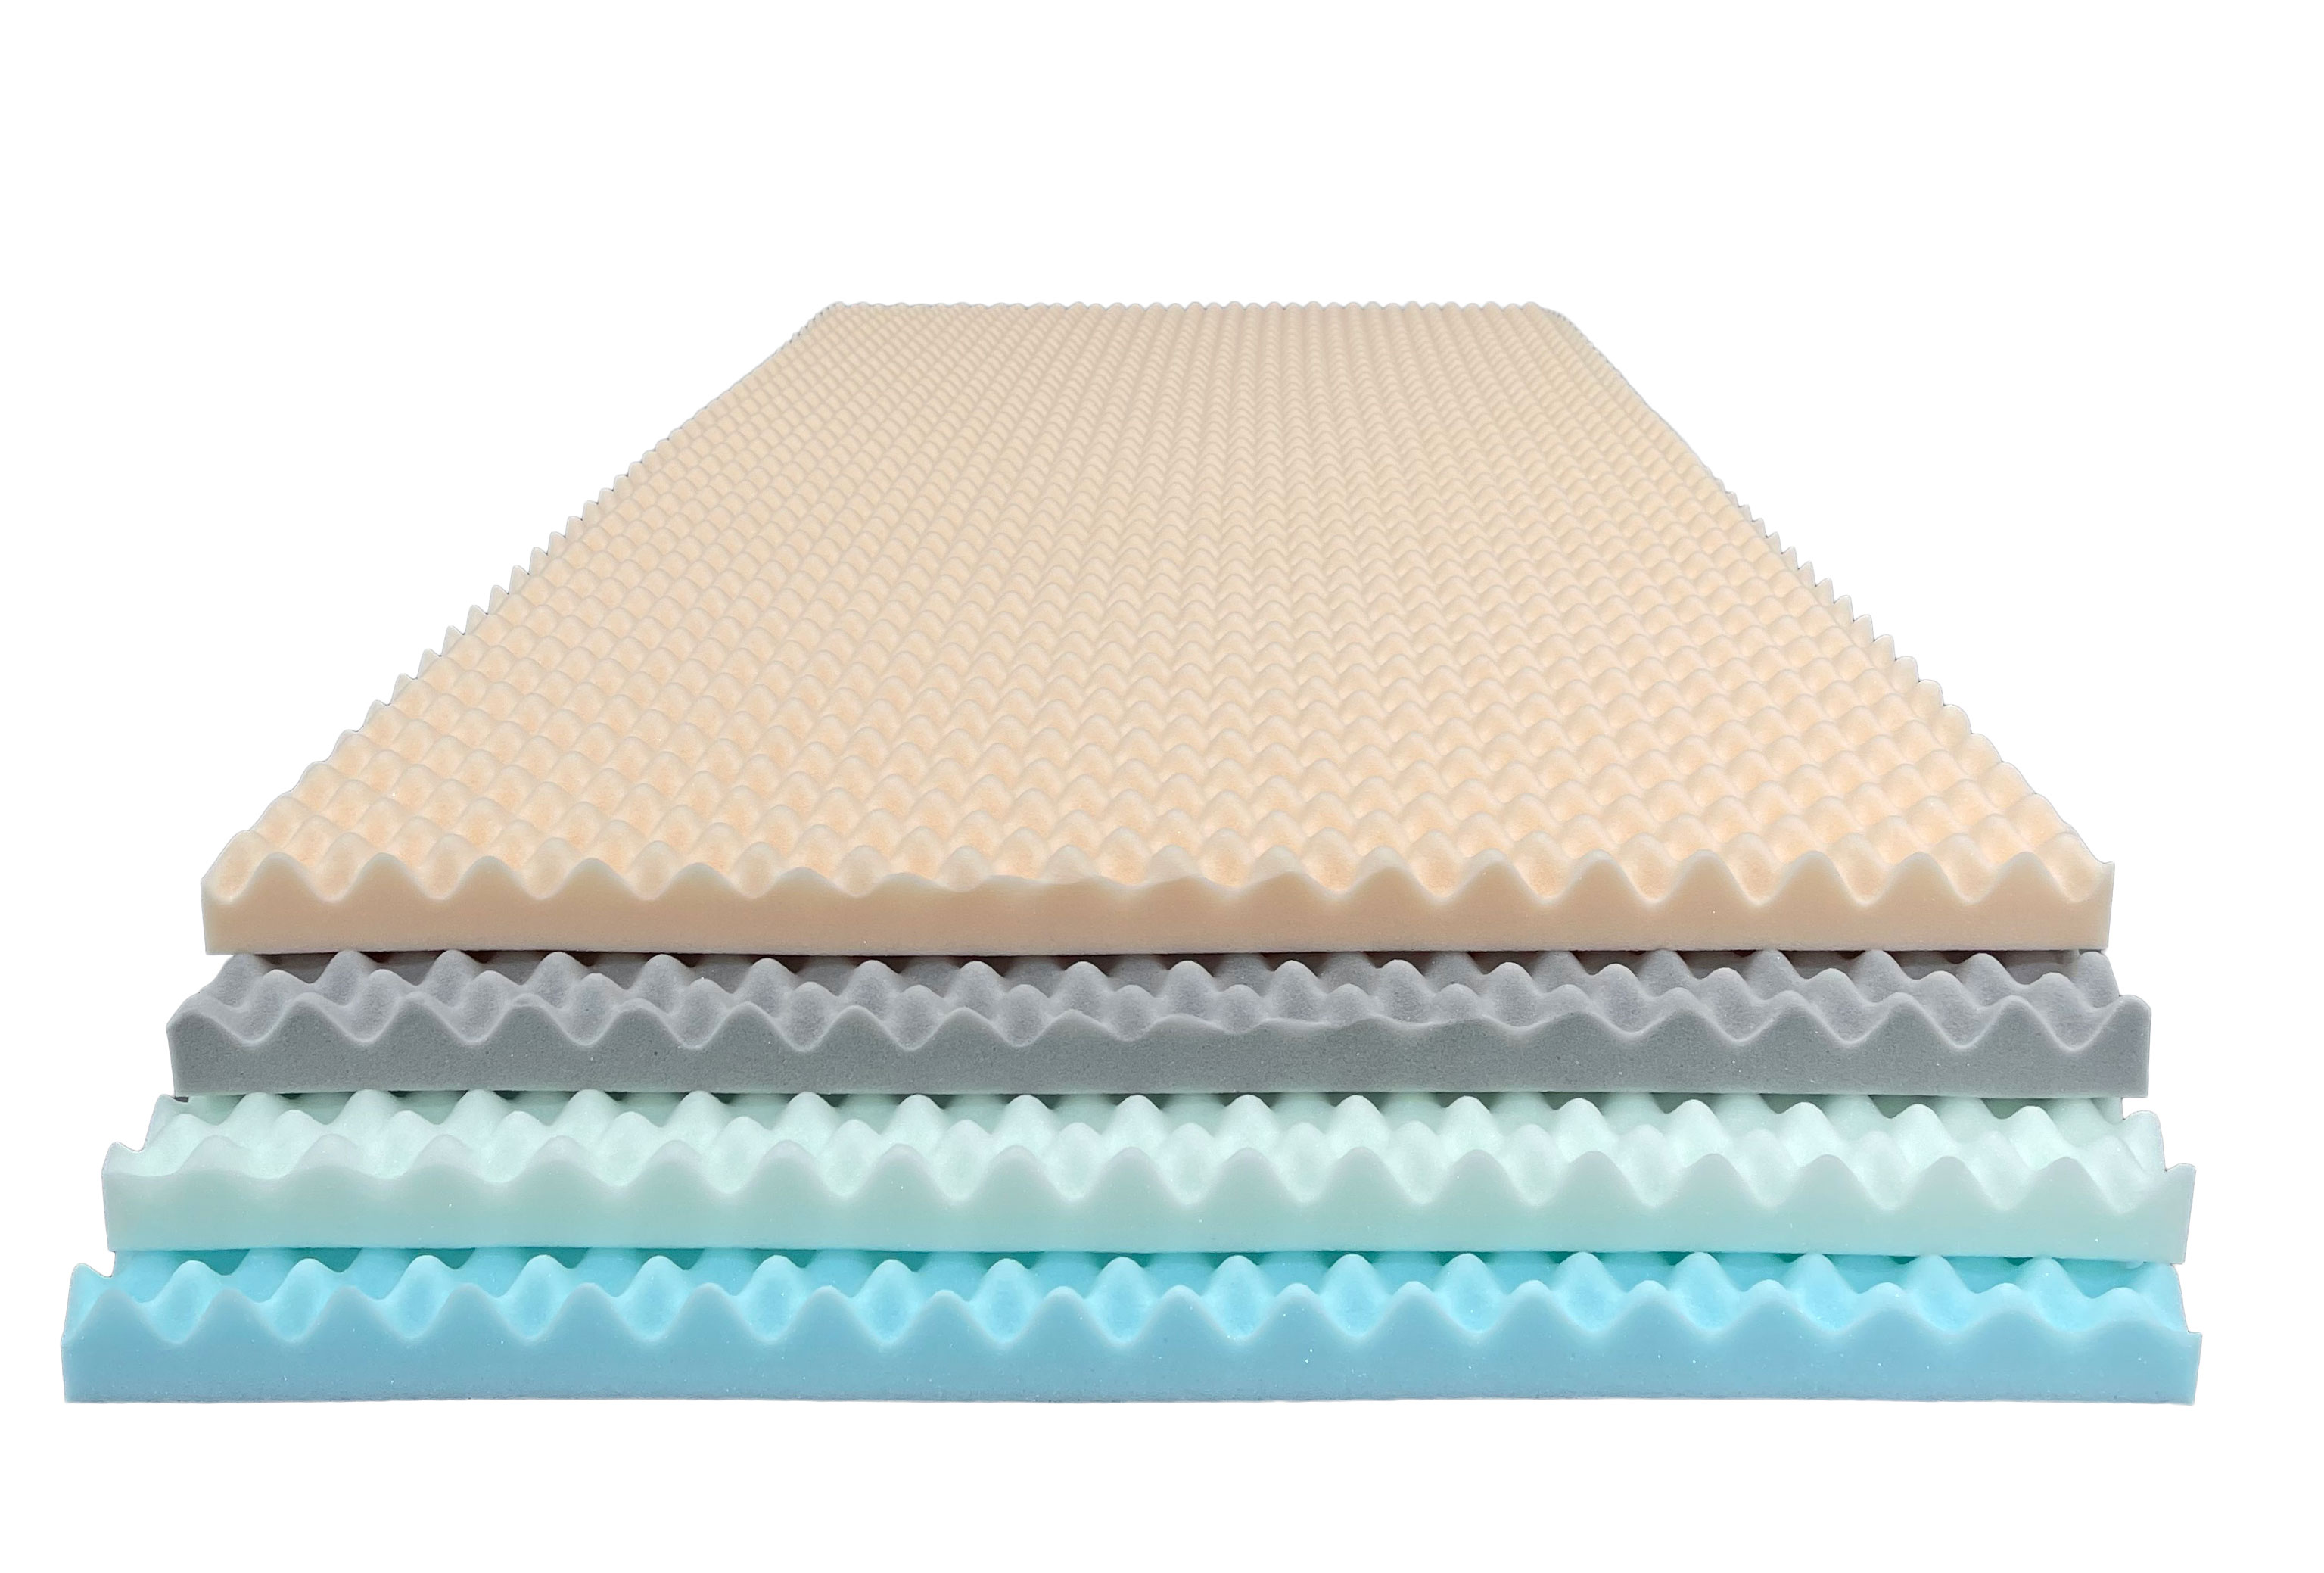 Egg Crate Profile Foam Toppers, Egg Crate Foam For King Size Bed